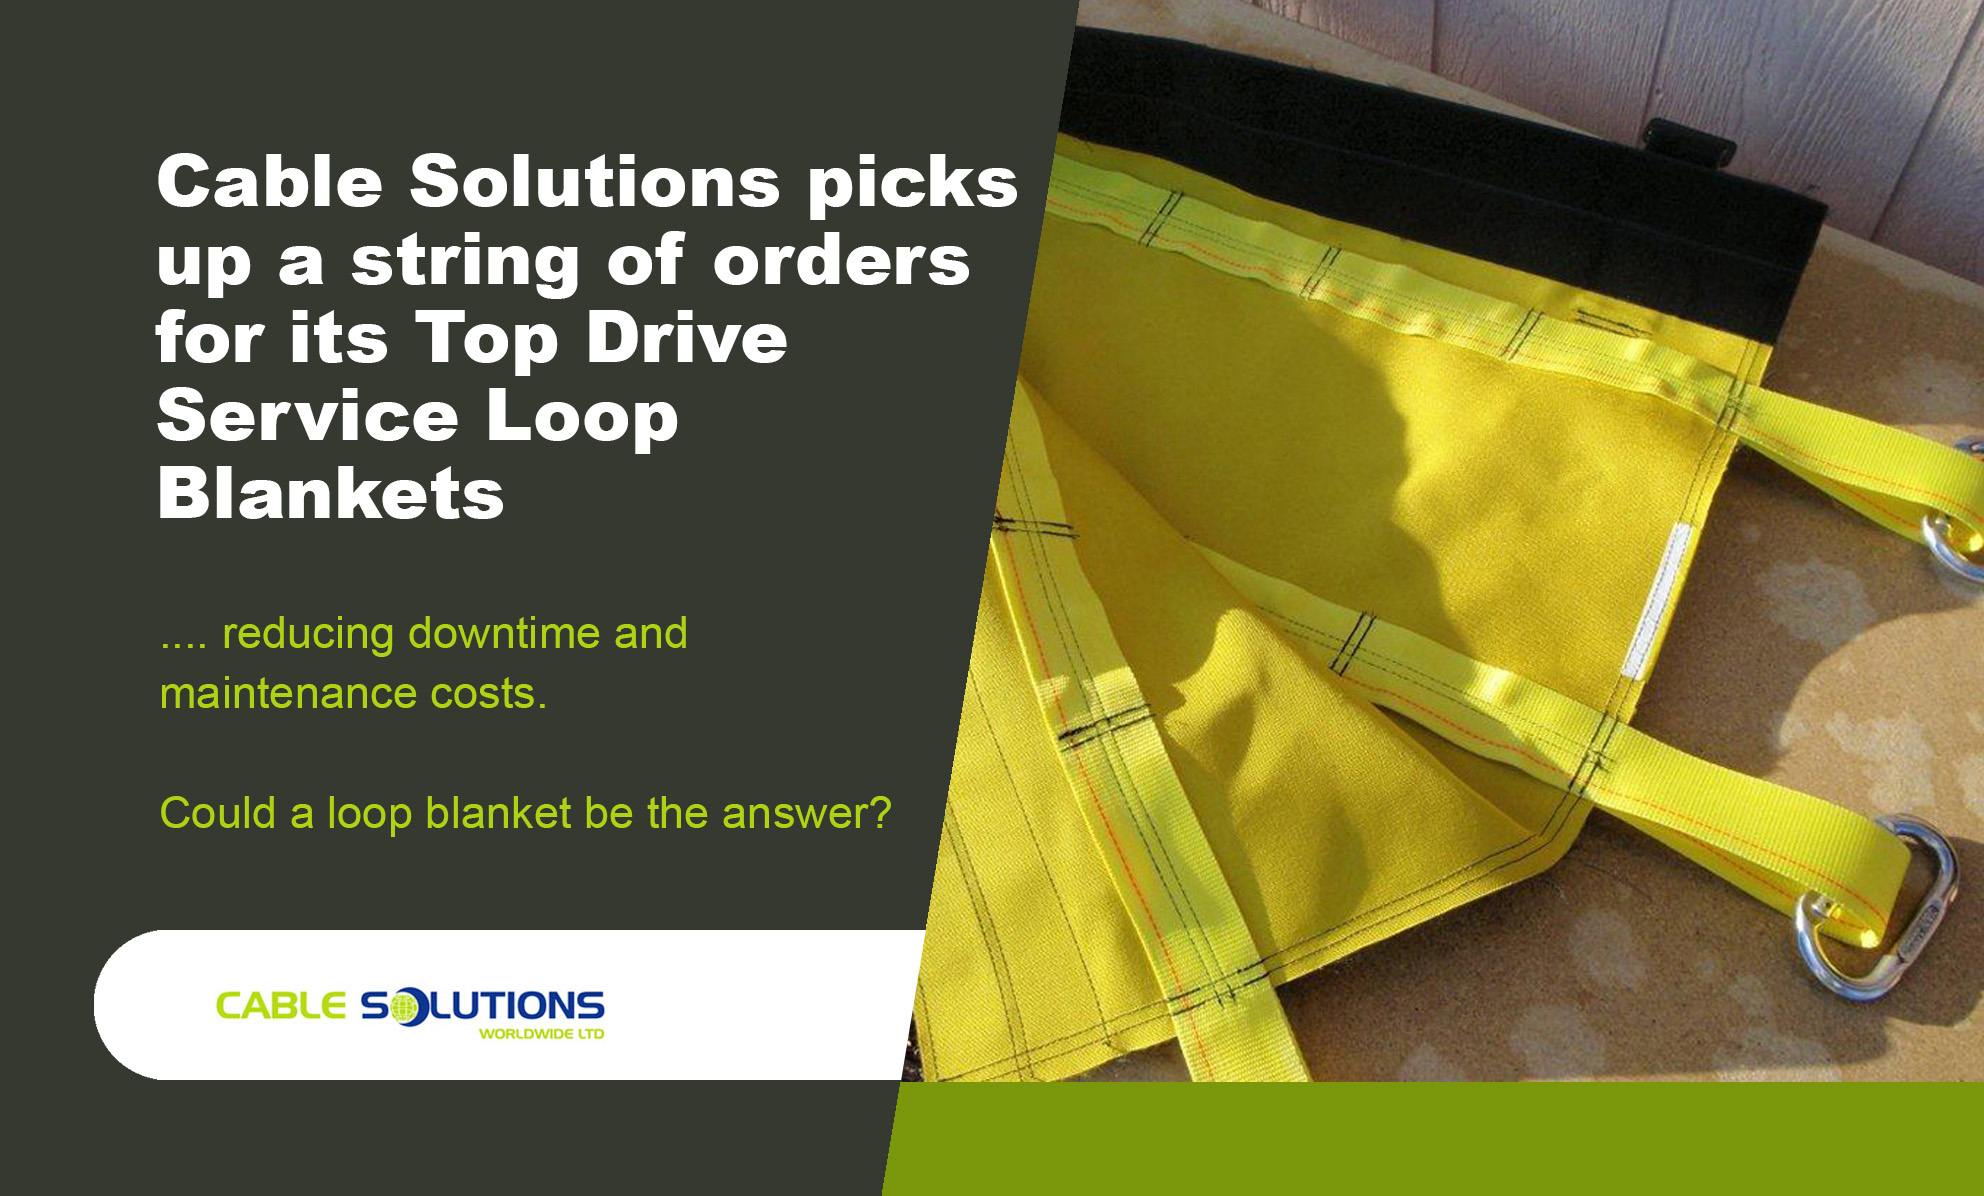 service loops blankets, covers